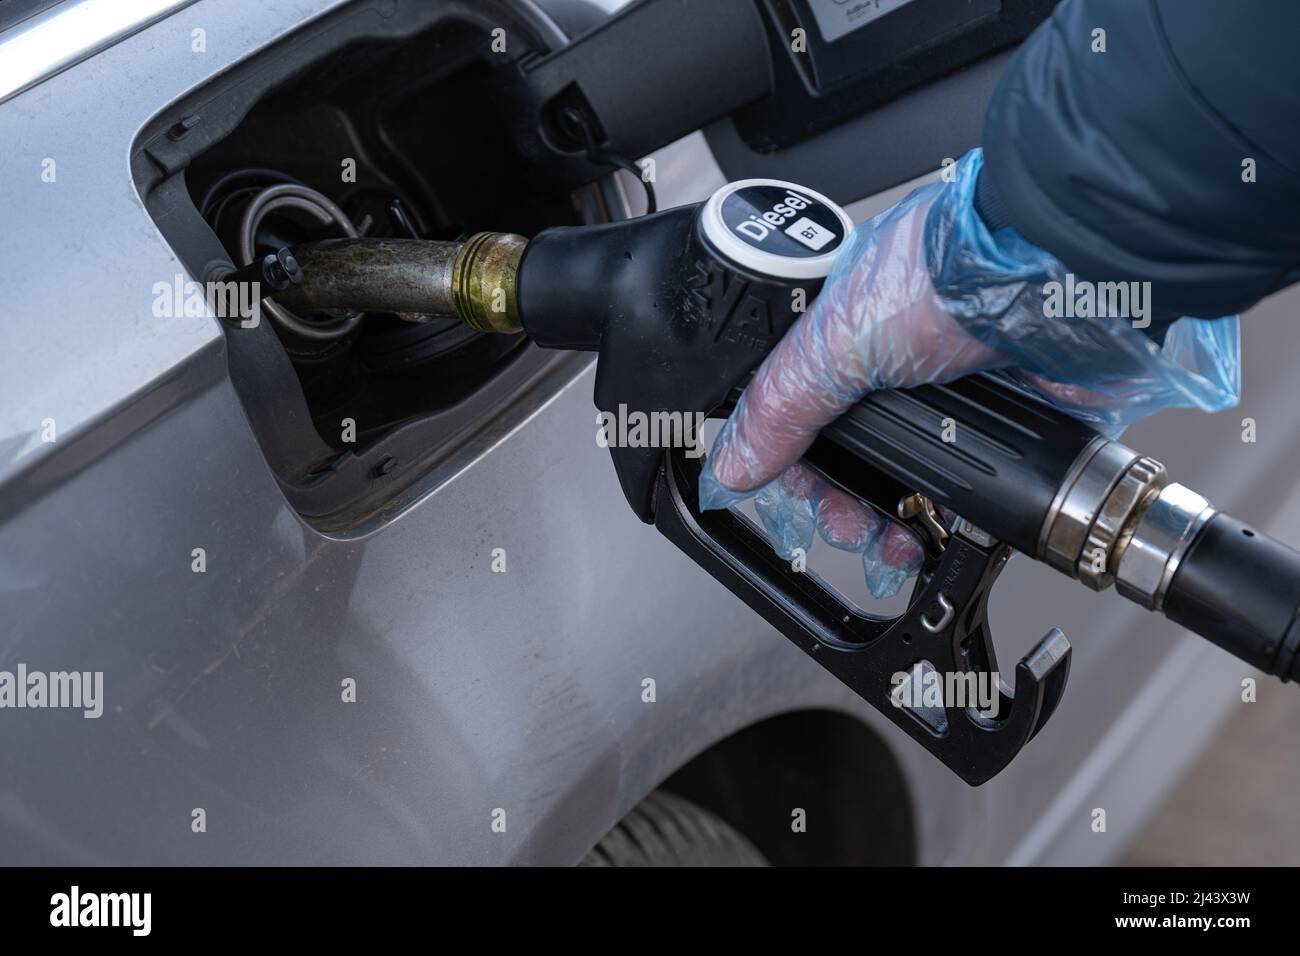 Diesel. Refueling the car.Refueling pistol in the hand .A man fills up a car tank with diesel fuel. Fuel price in Europe. Stock Photo